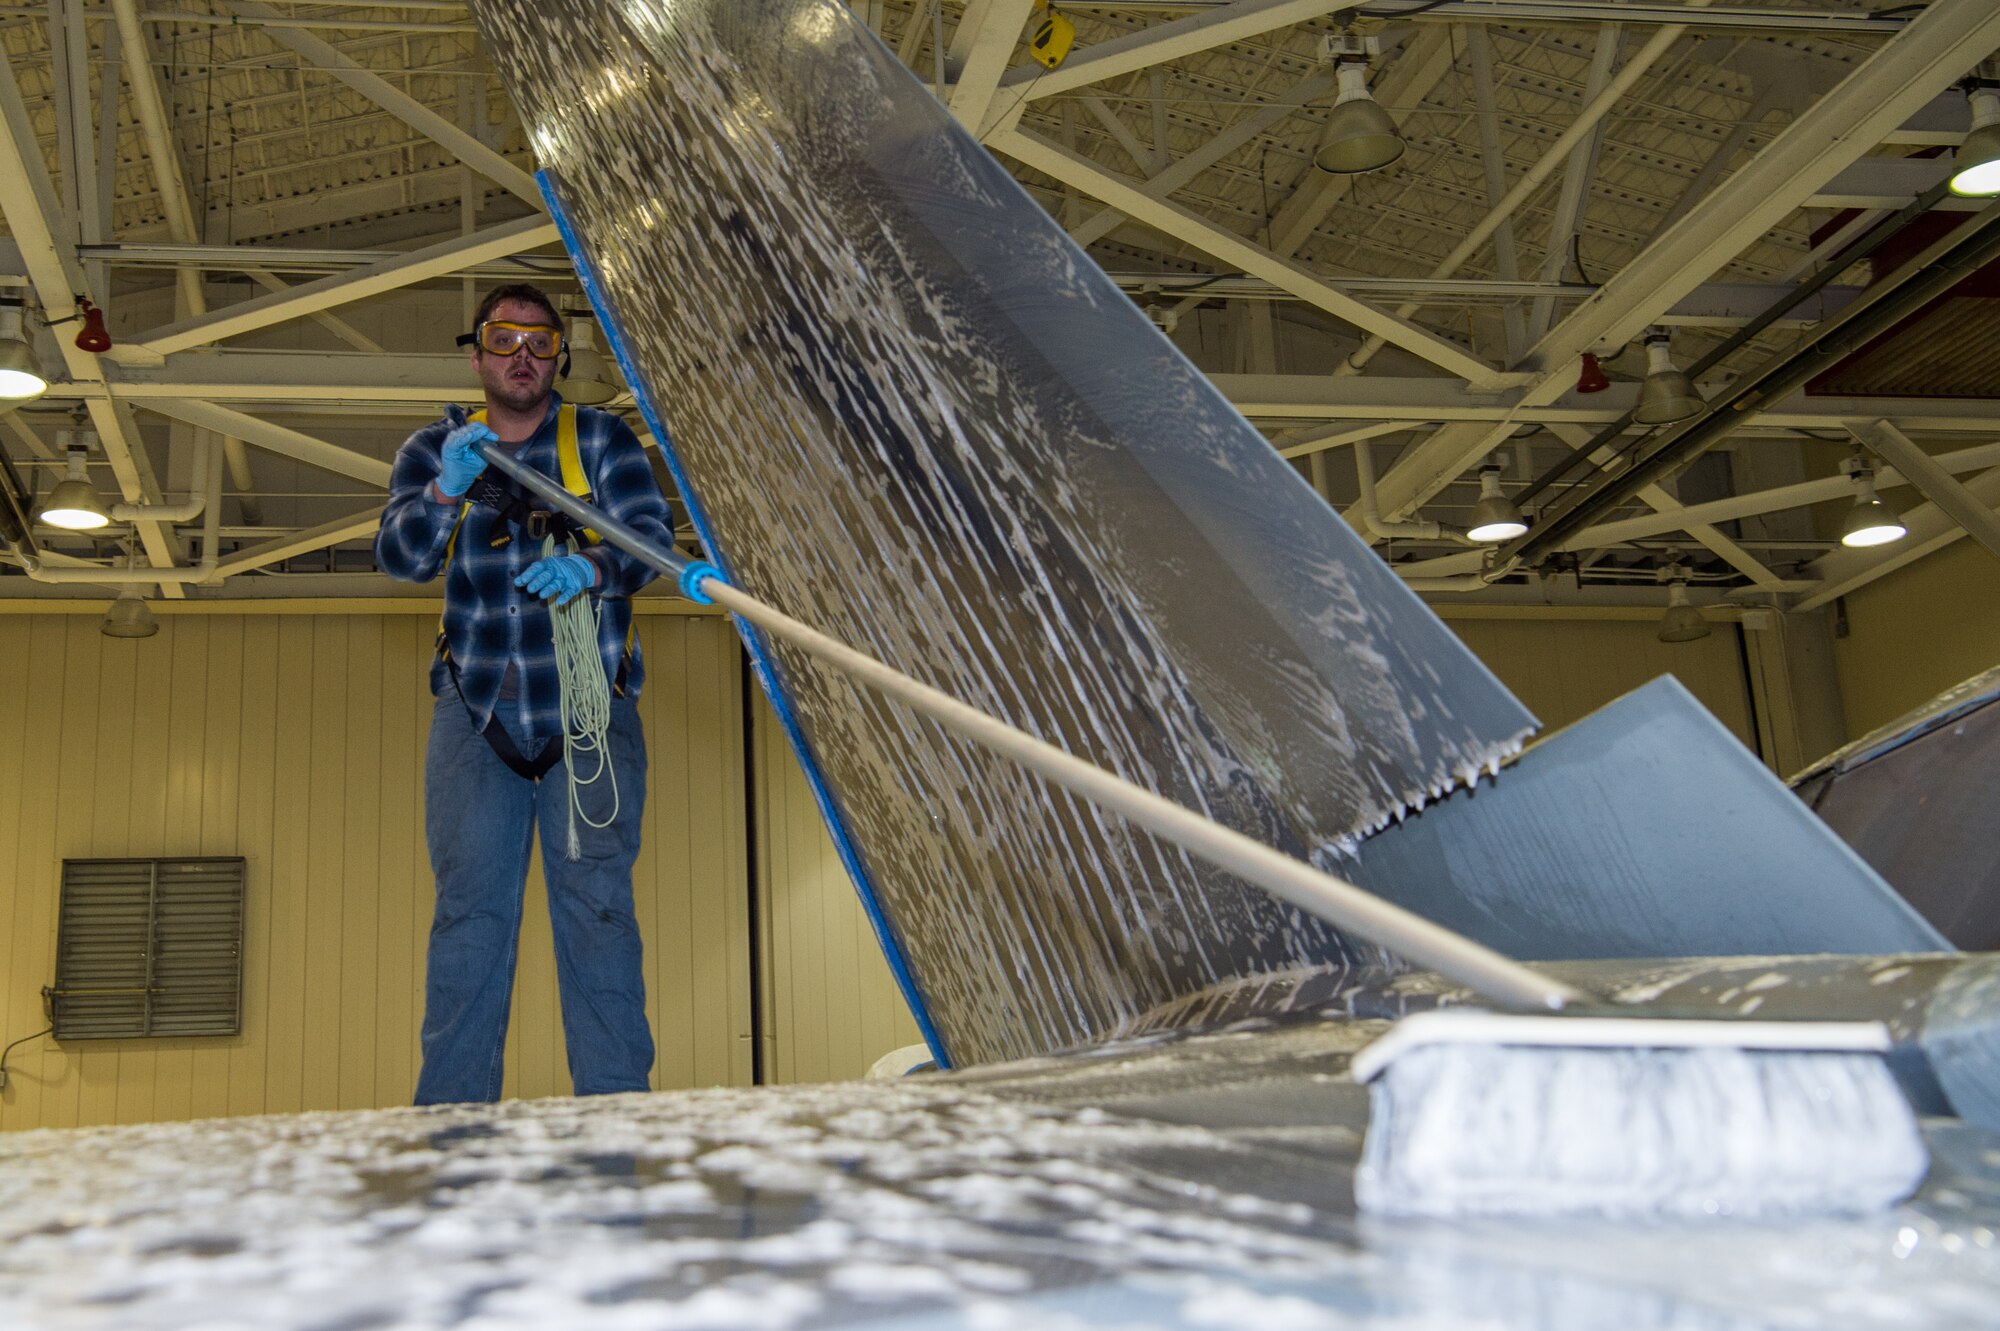 Andrew Sarillana, Shiloh Services Incorporated aircraft wash contractor with the 1st Maintenance Group, washes a U.S. Air Force F-22 Raptor at Joint Base Langley-Eustis, Virginia, Dec 12, 2019.